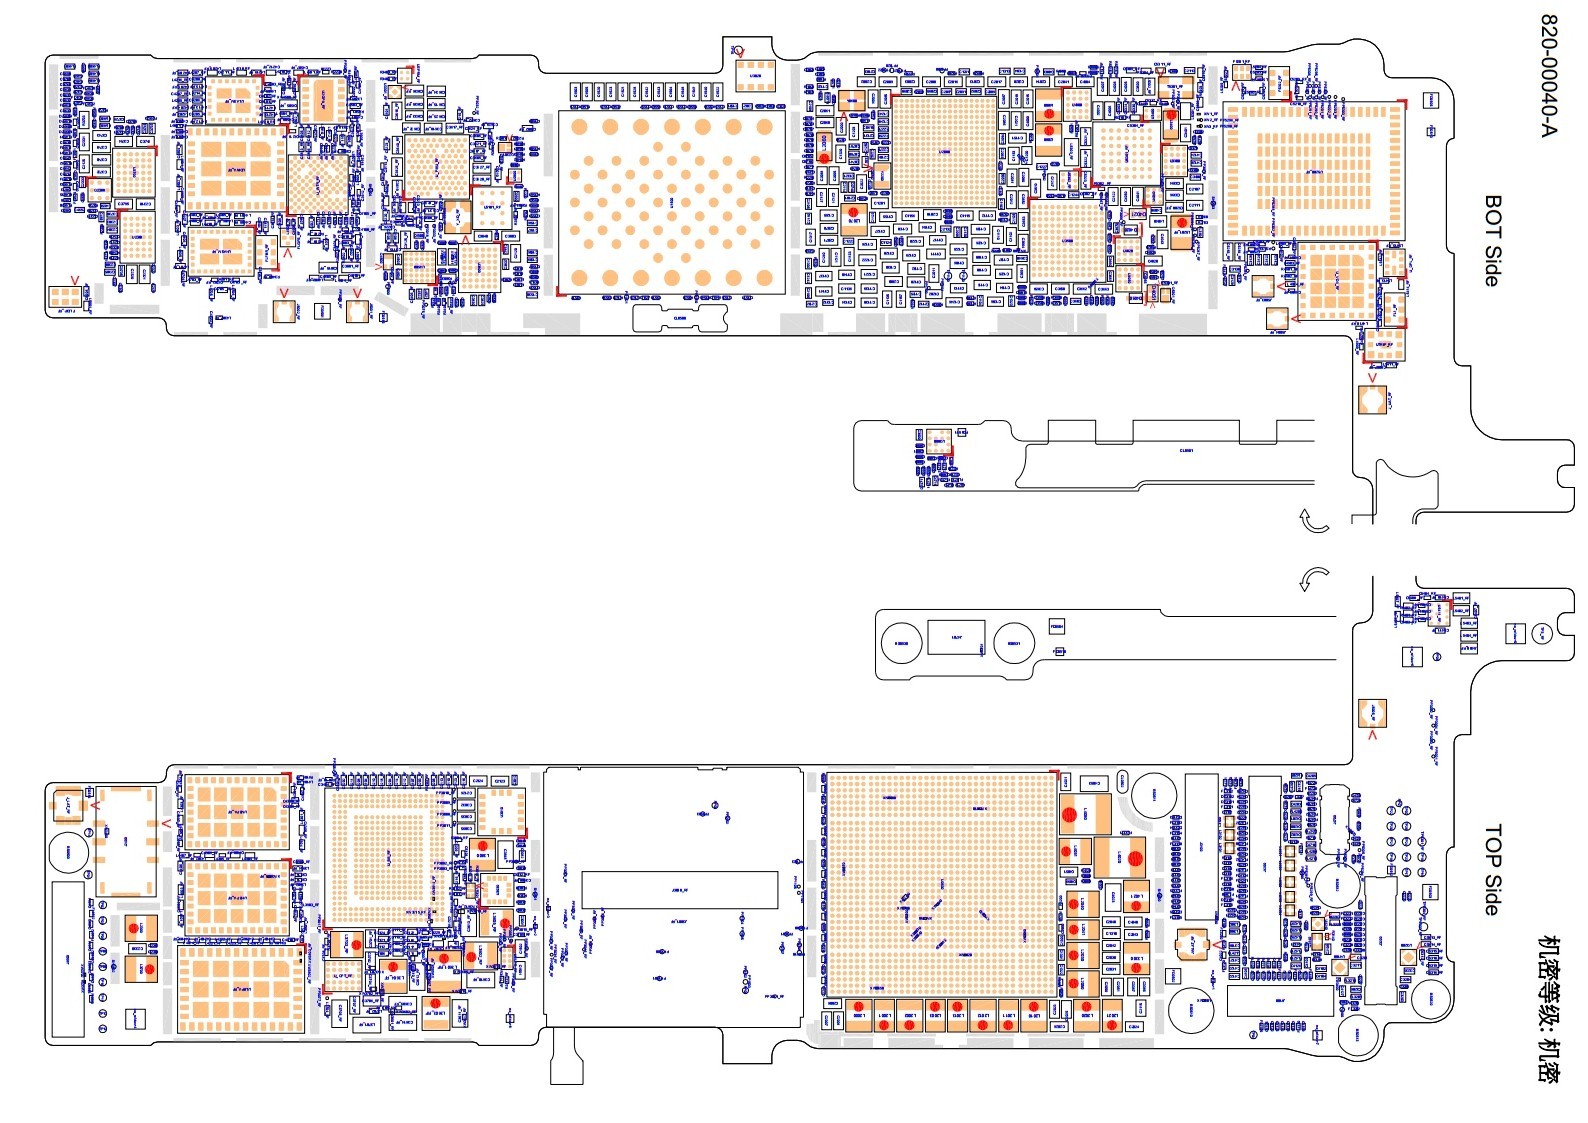 schematic Page2 05 iphone 6s n66 boardview Page1 Schematic for